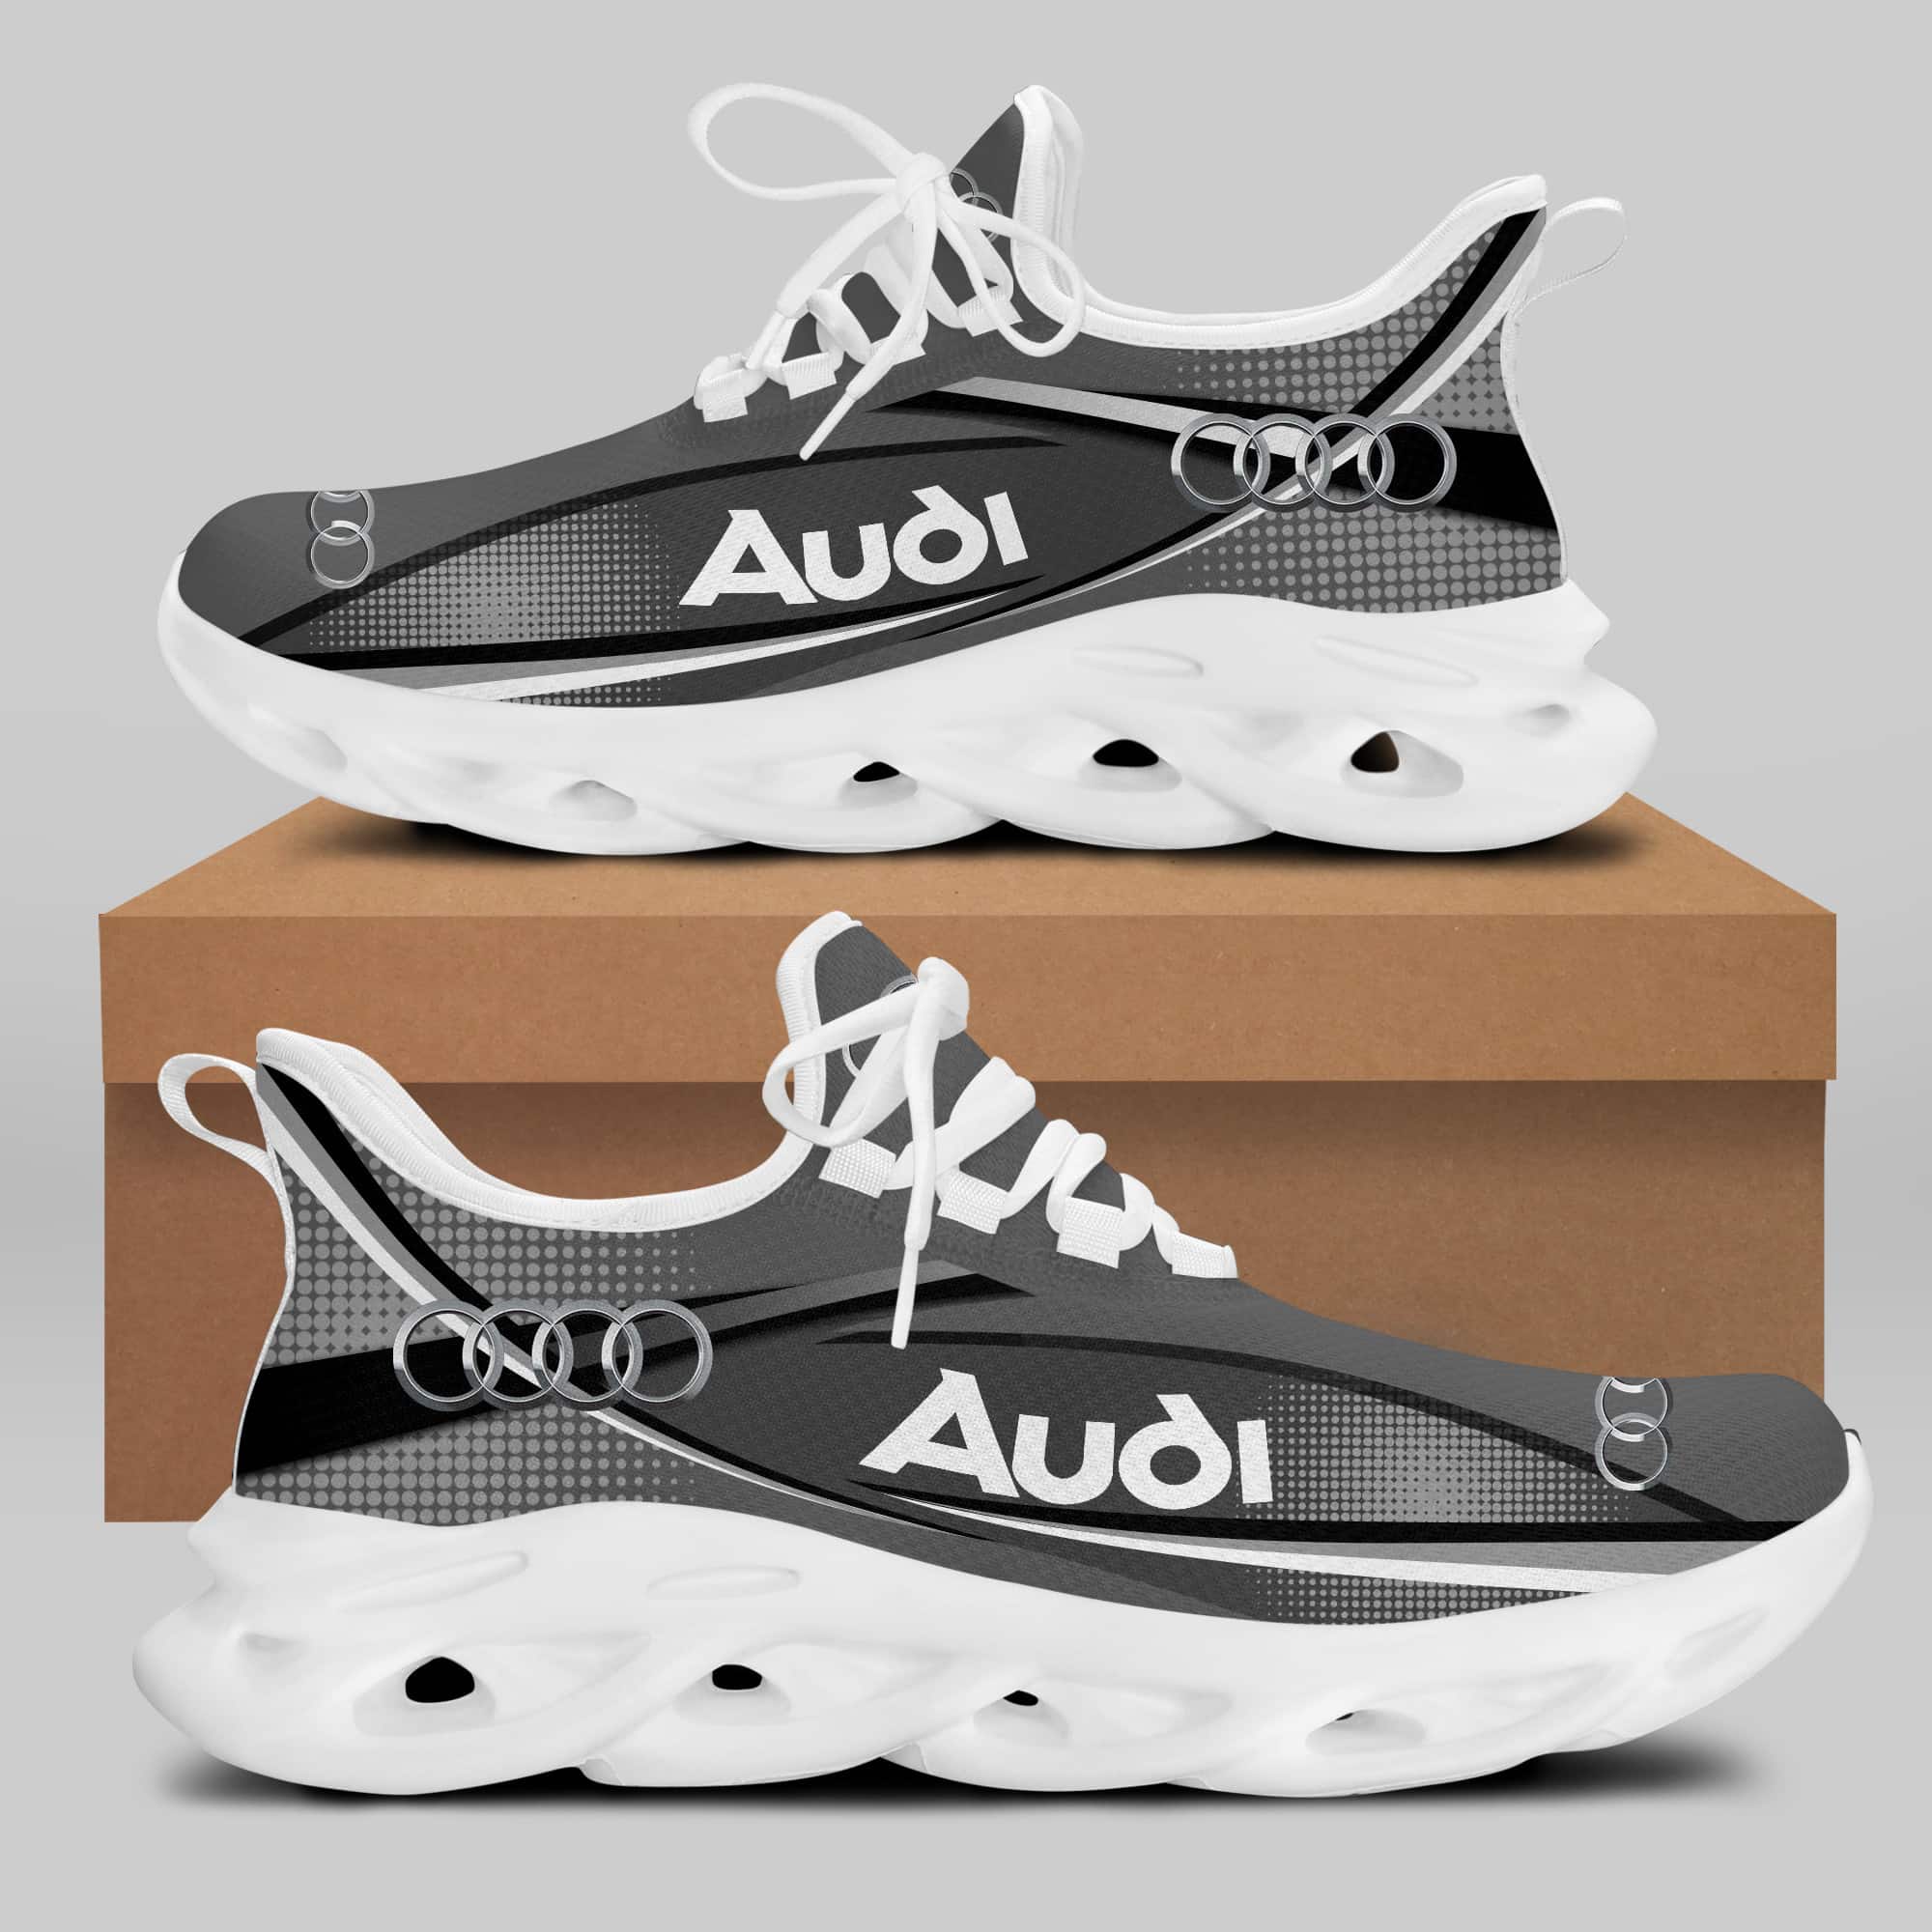 Audi Sport Running Shoes Max Soul Shoes Sneakers Ver 50 2